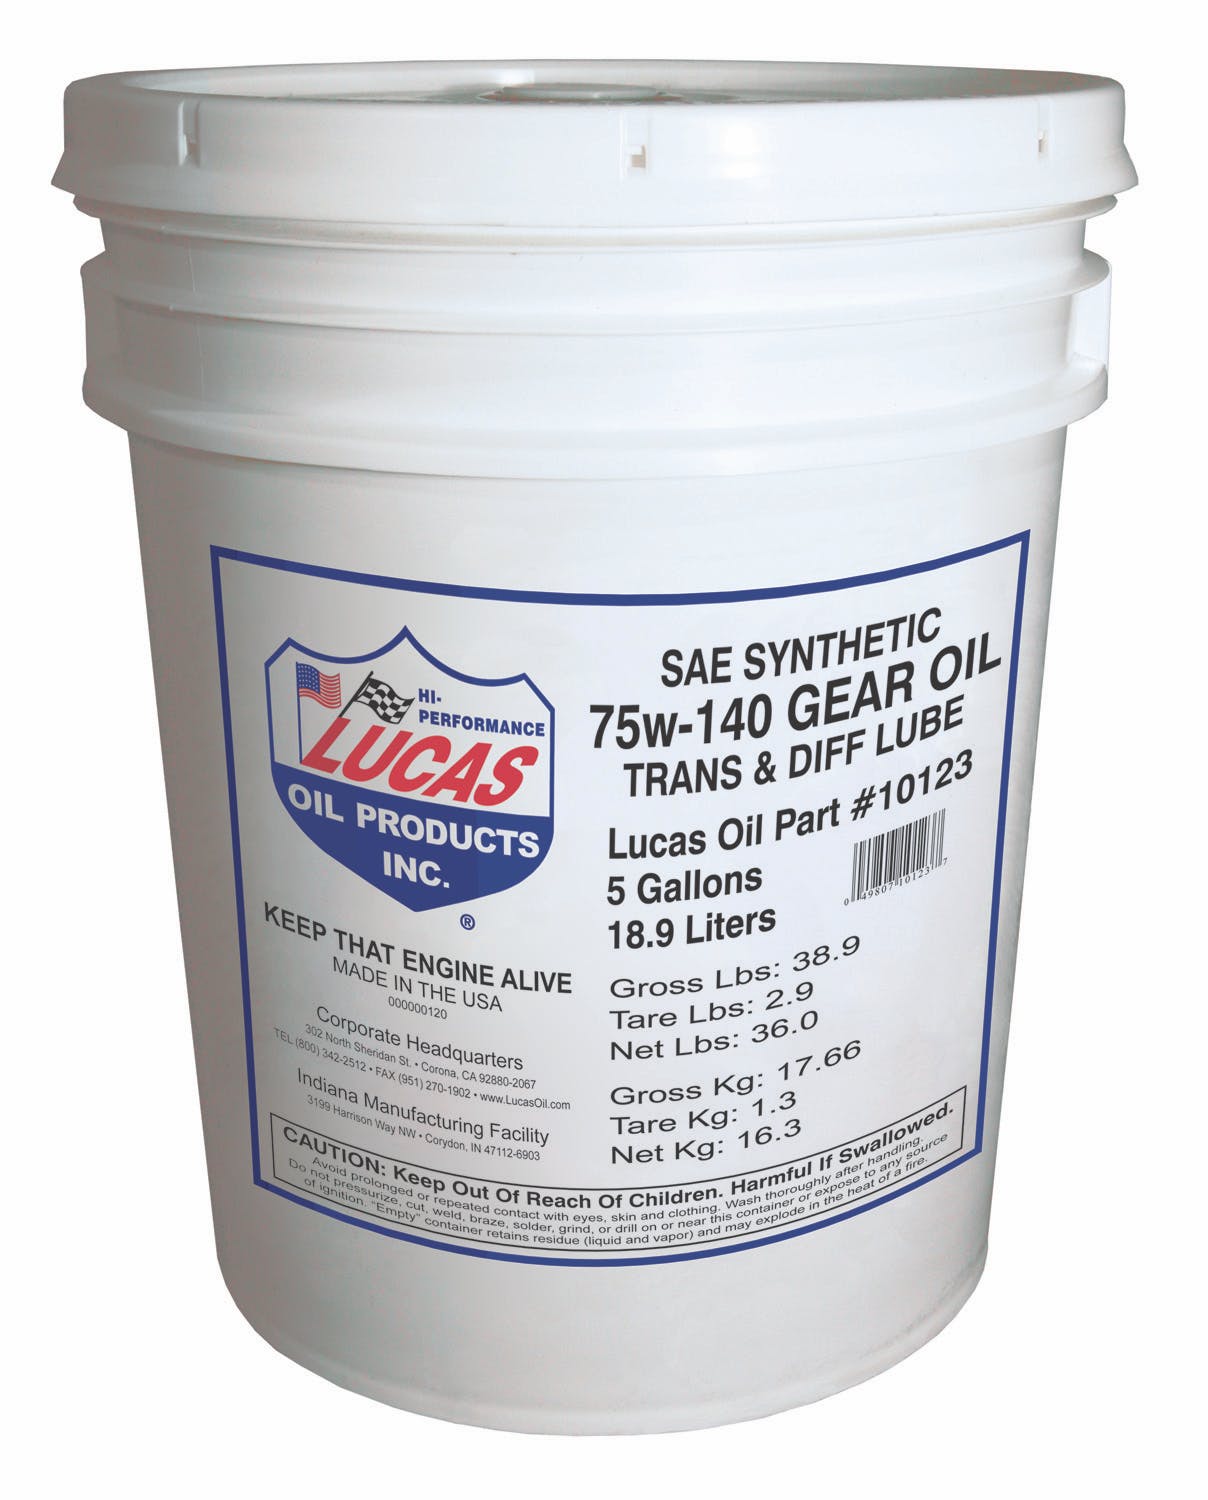 Lucas OIL Synthetic SAE 75W-140 Trans & Diff Lube 10123